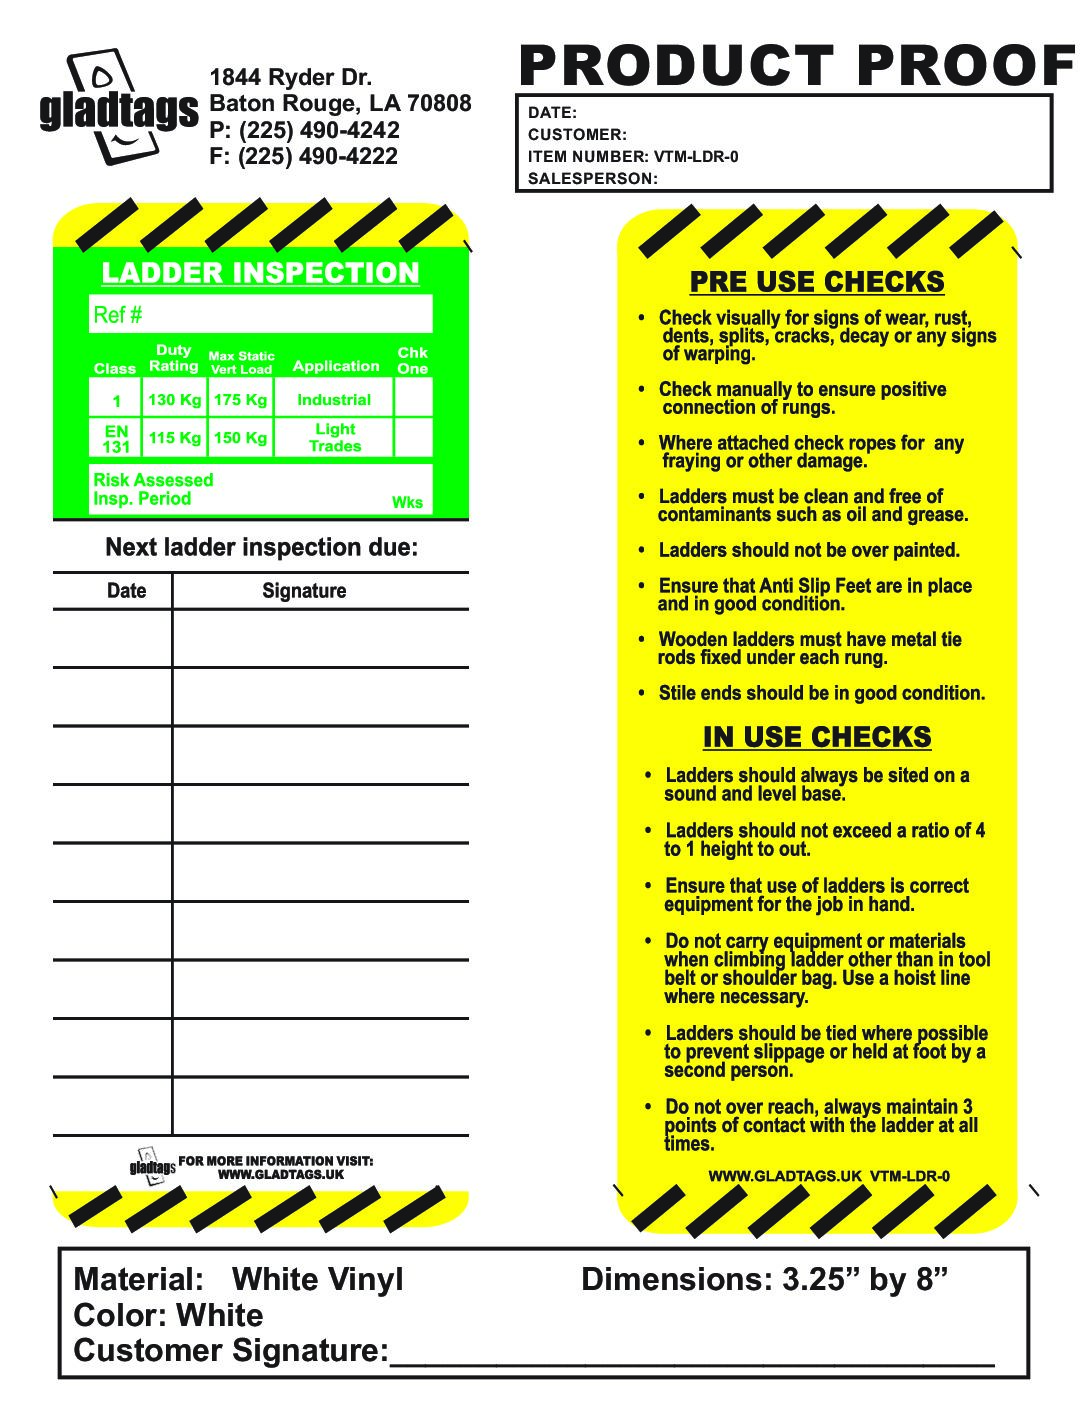 MultiColored Vinyl Scaffolding Tags – VTM-LDR-0 Proof